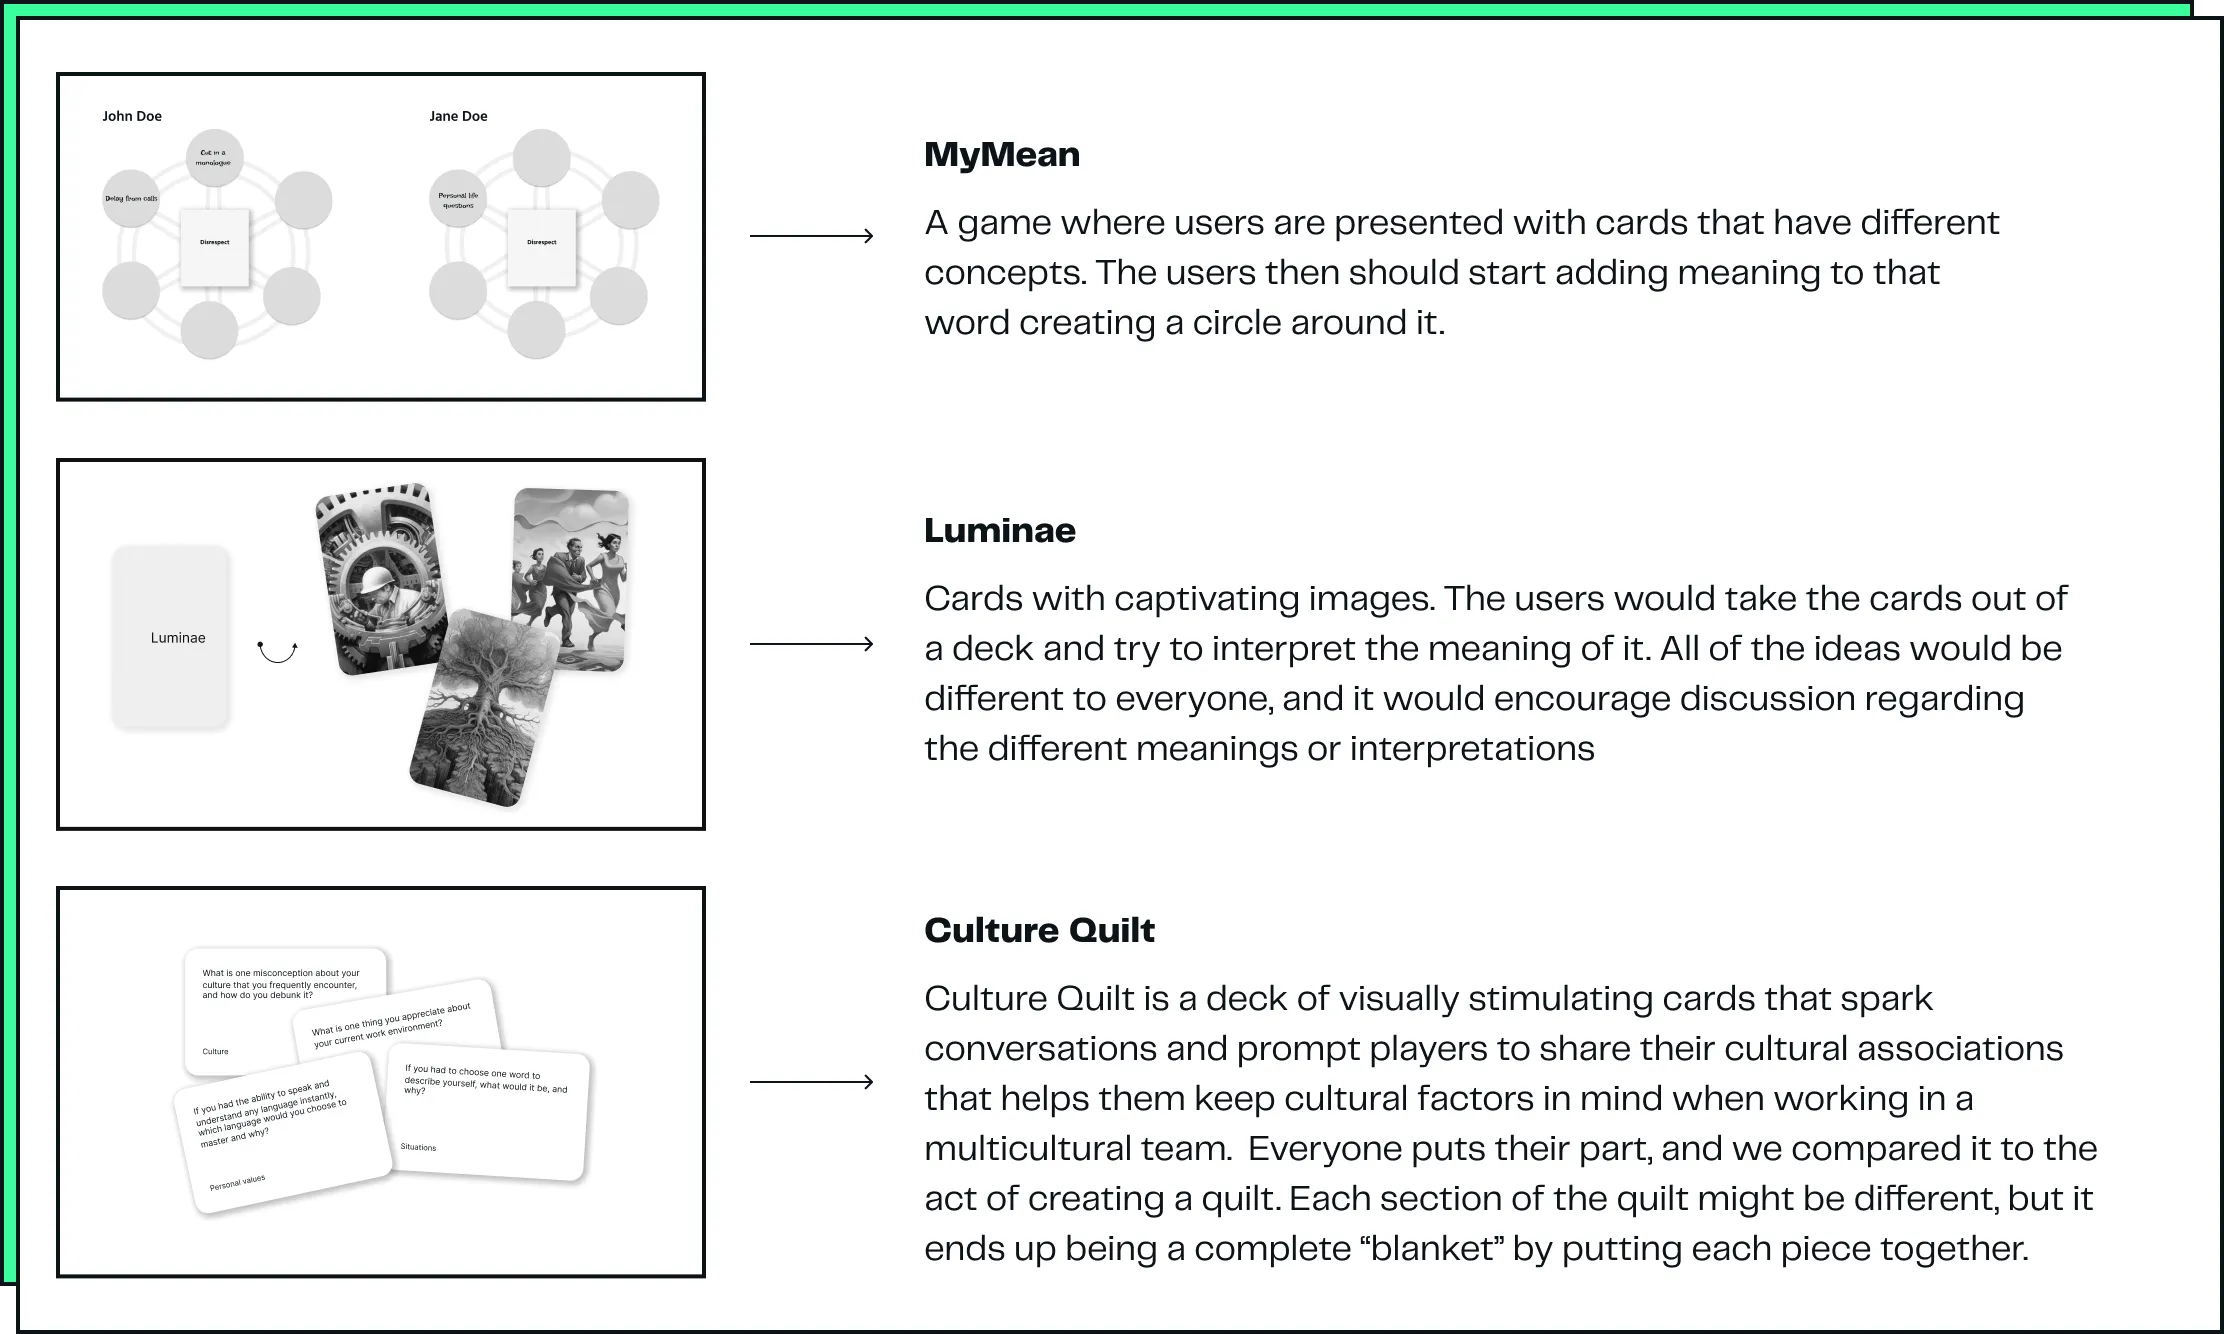 We had 3 different physical card game ideas: MyMean, Luminae and Culture Quilt